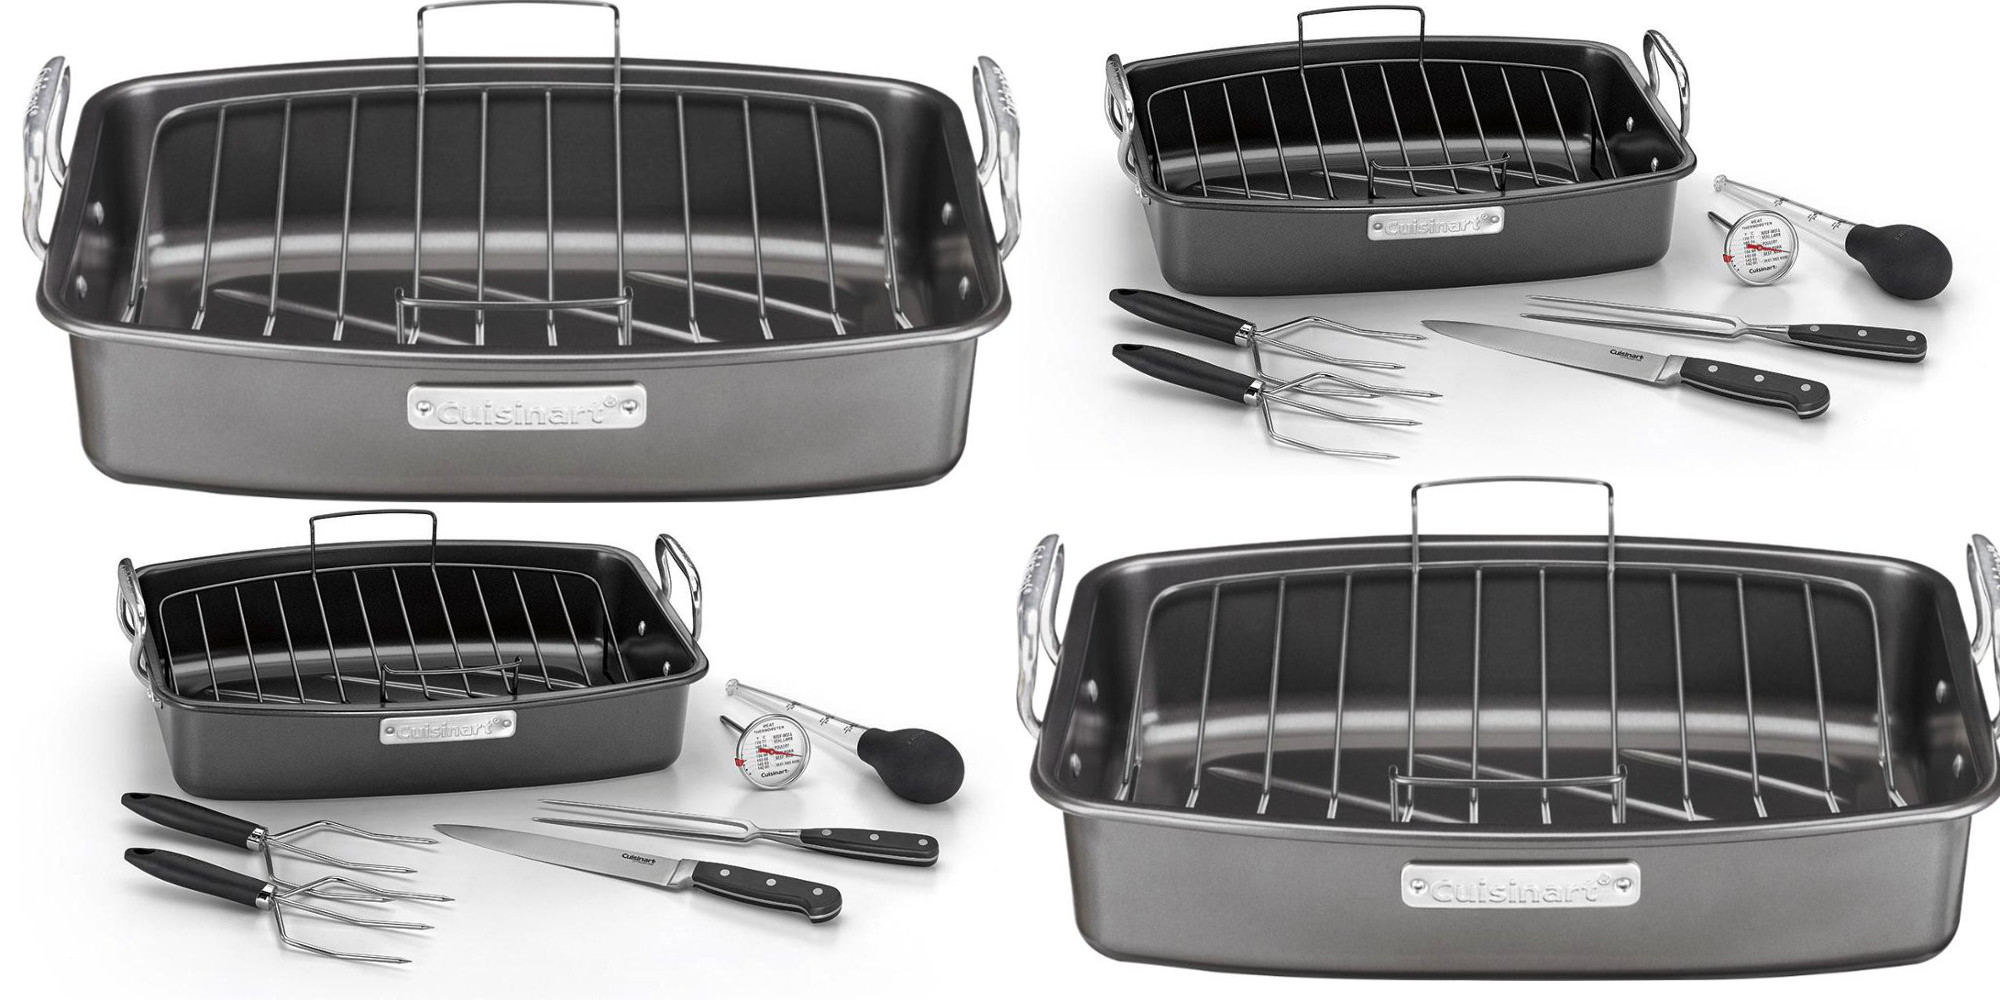 https://9to5toys.com/wp-content/uploads/sites/5/2019/02/Cuisinart-Steel-Nonstick-17-x-13-inch-Roaster-Set-with-Carving-Tools.jpg